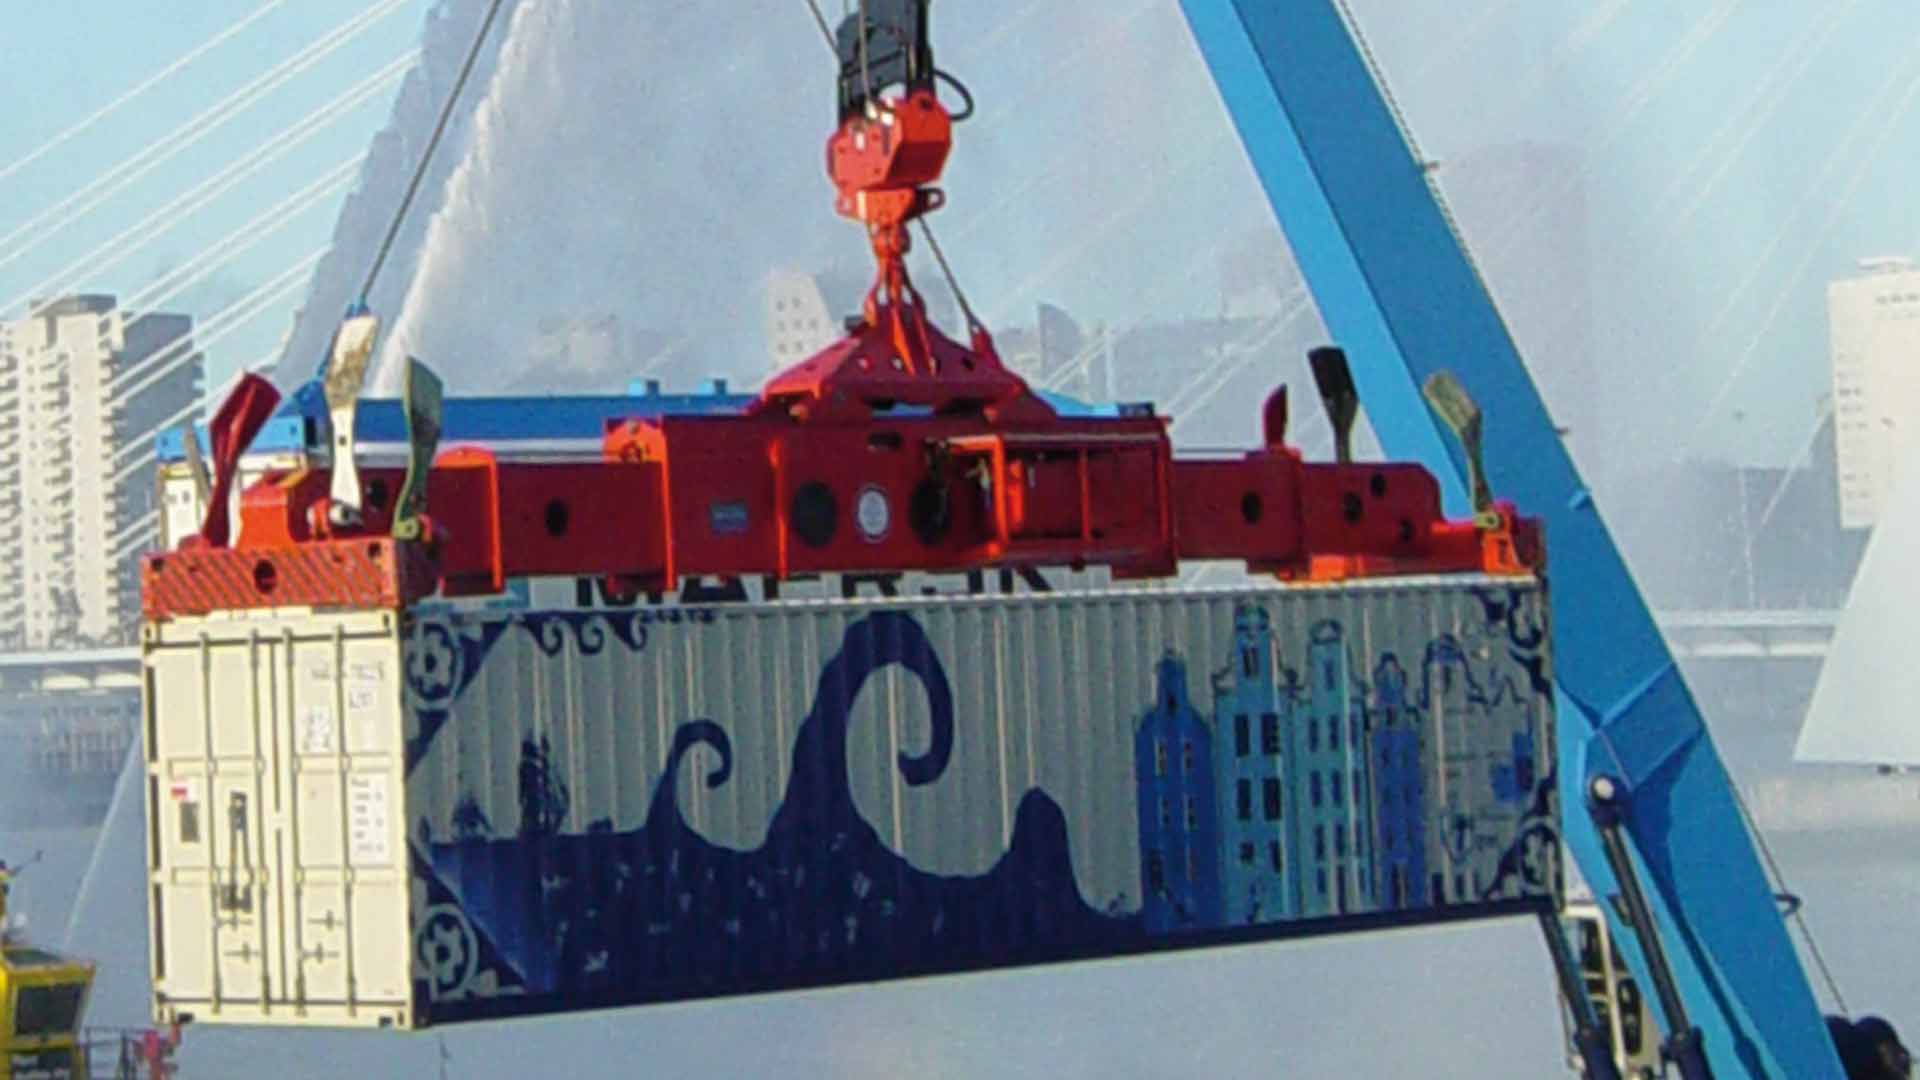 A large container hangs in the air on a container spreader with a city in the background